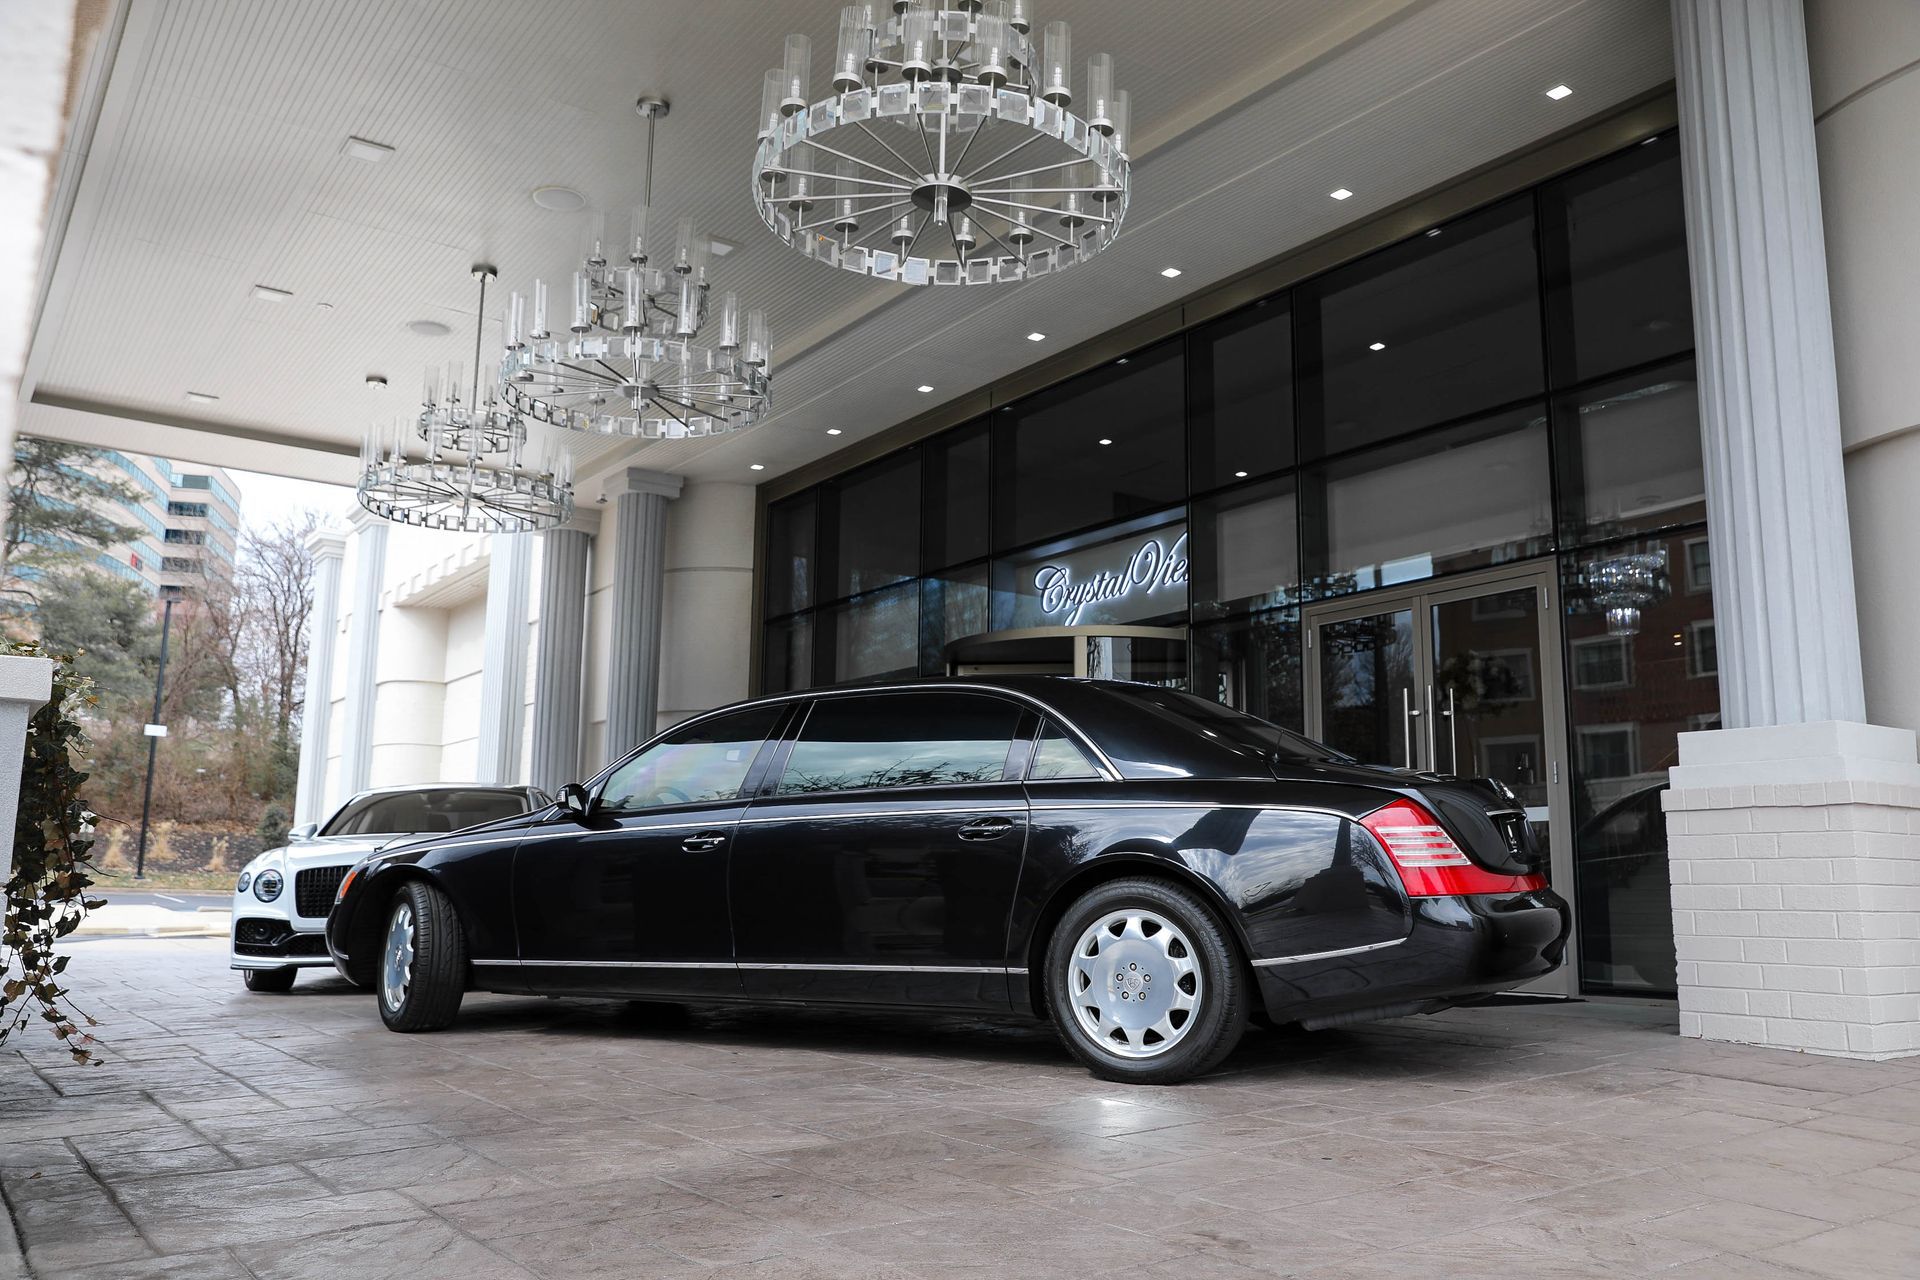 Maybach 62 used for car photo opportunities for events